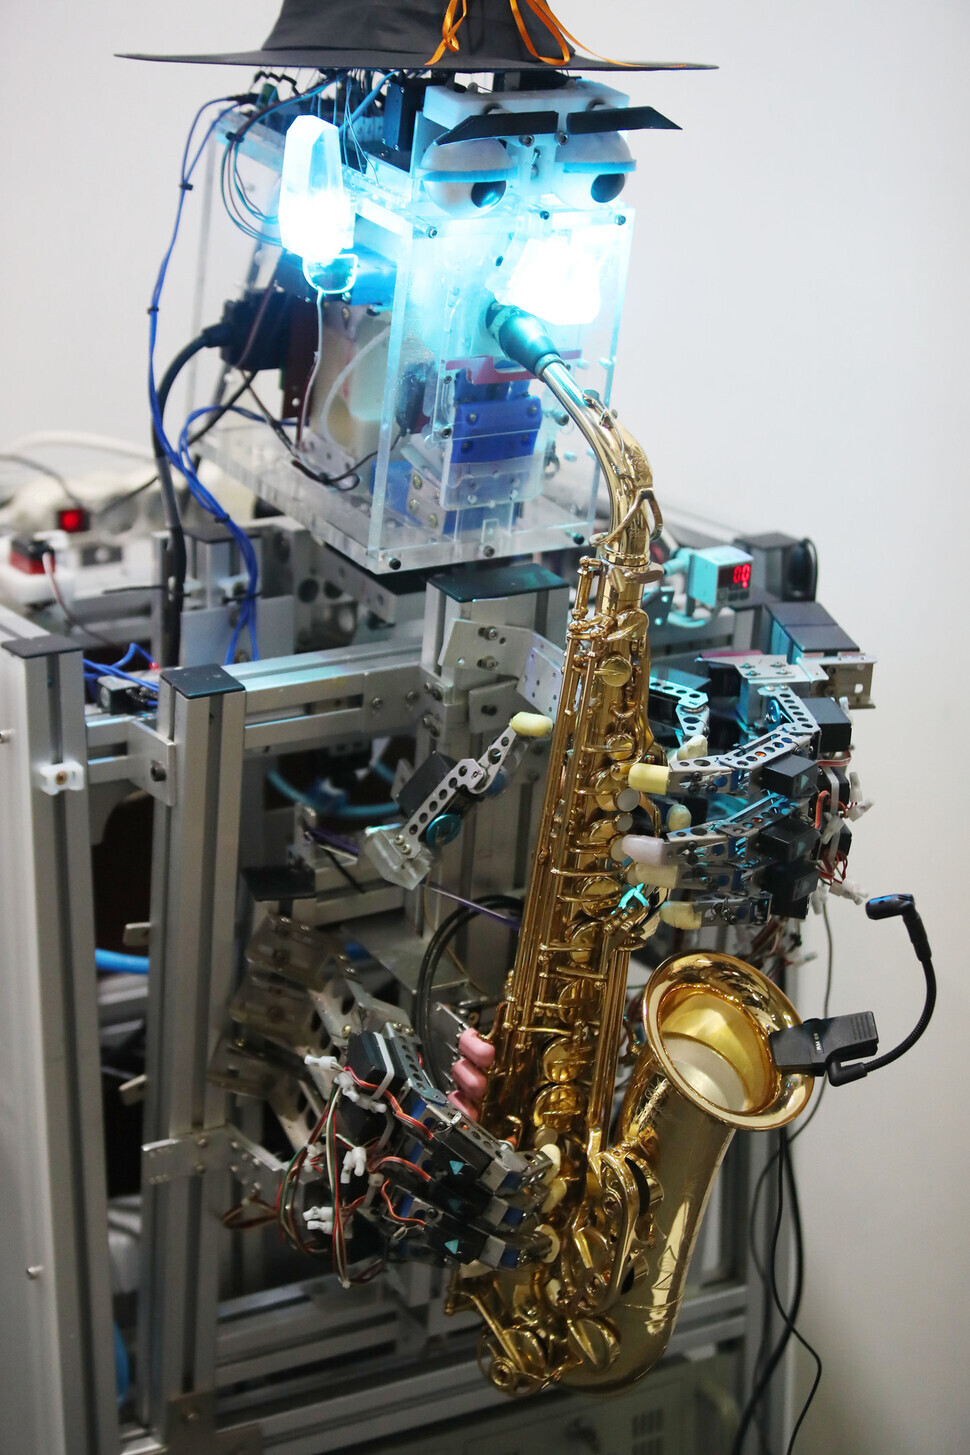 A robot developed by Baron Robotics plays the saxophone on Oct. 28, the opening day of Robotworld 2020 at KINTEX in Goyang, Gyeonggi Province.